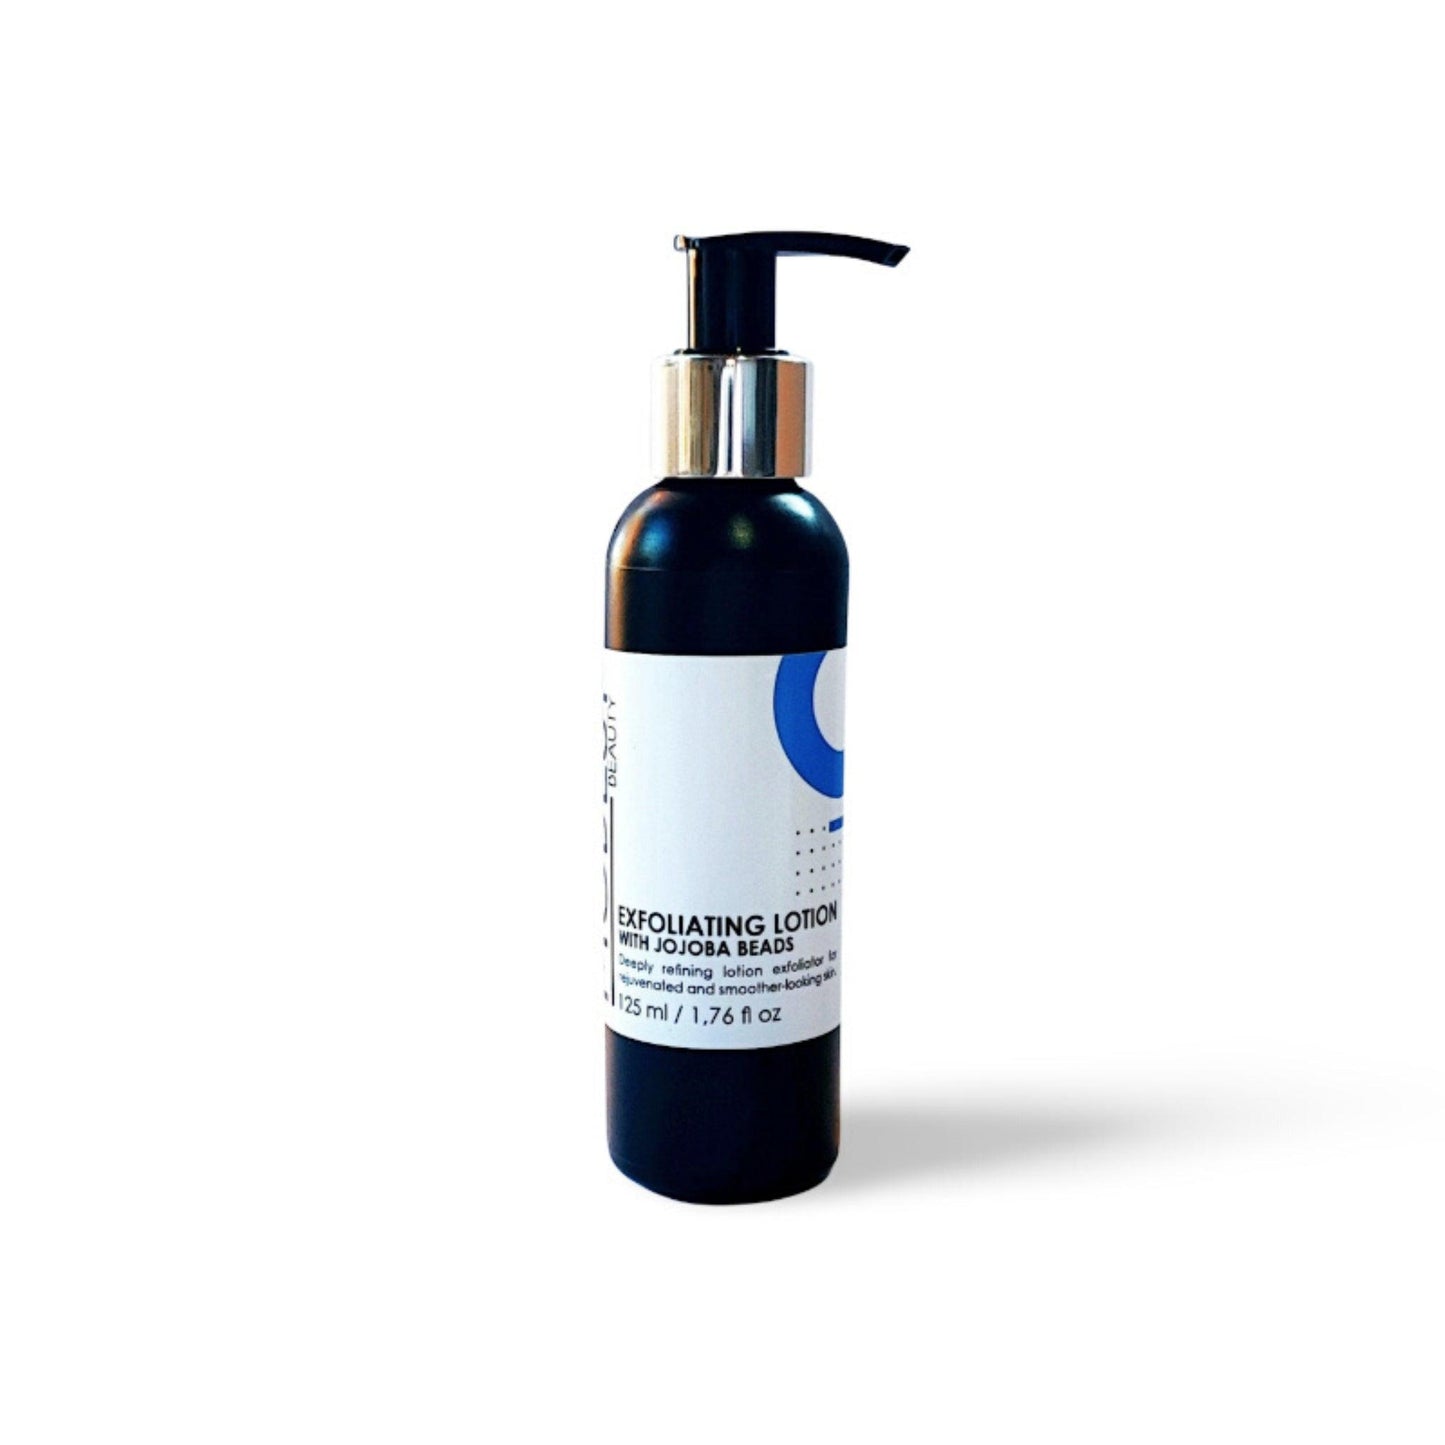 A sleek black bottle of Modest Beauty Exfoliating Lotion with Jojoba Beads with a pump dispenser, labeled "Exfoliating Lotion with Jojoba Beads" on a white background. The bottle also mentions "125 ml / 1.7 fl. oz." and features a blue and white label design.